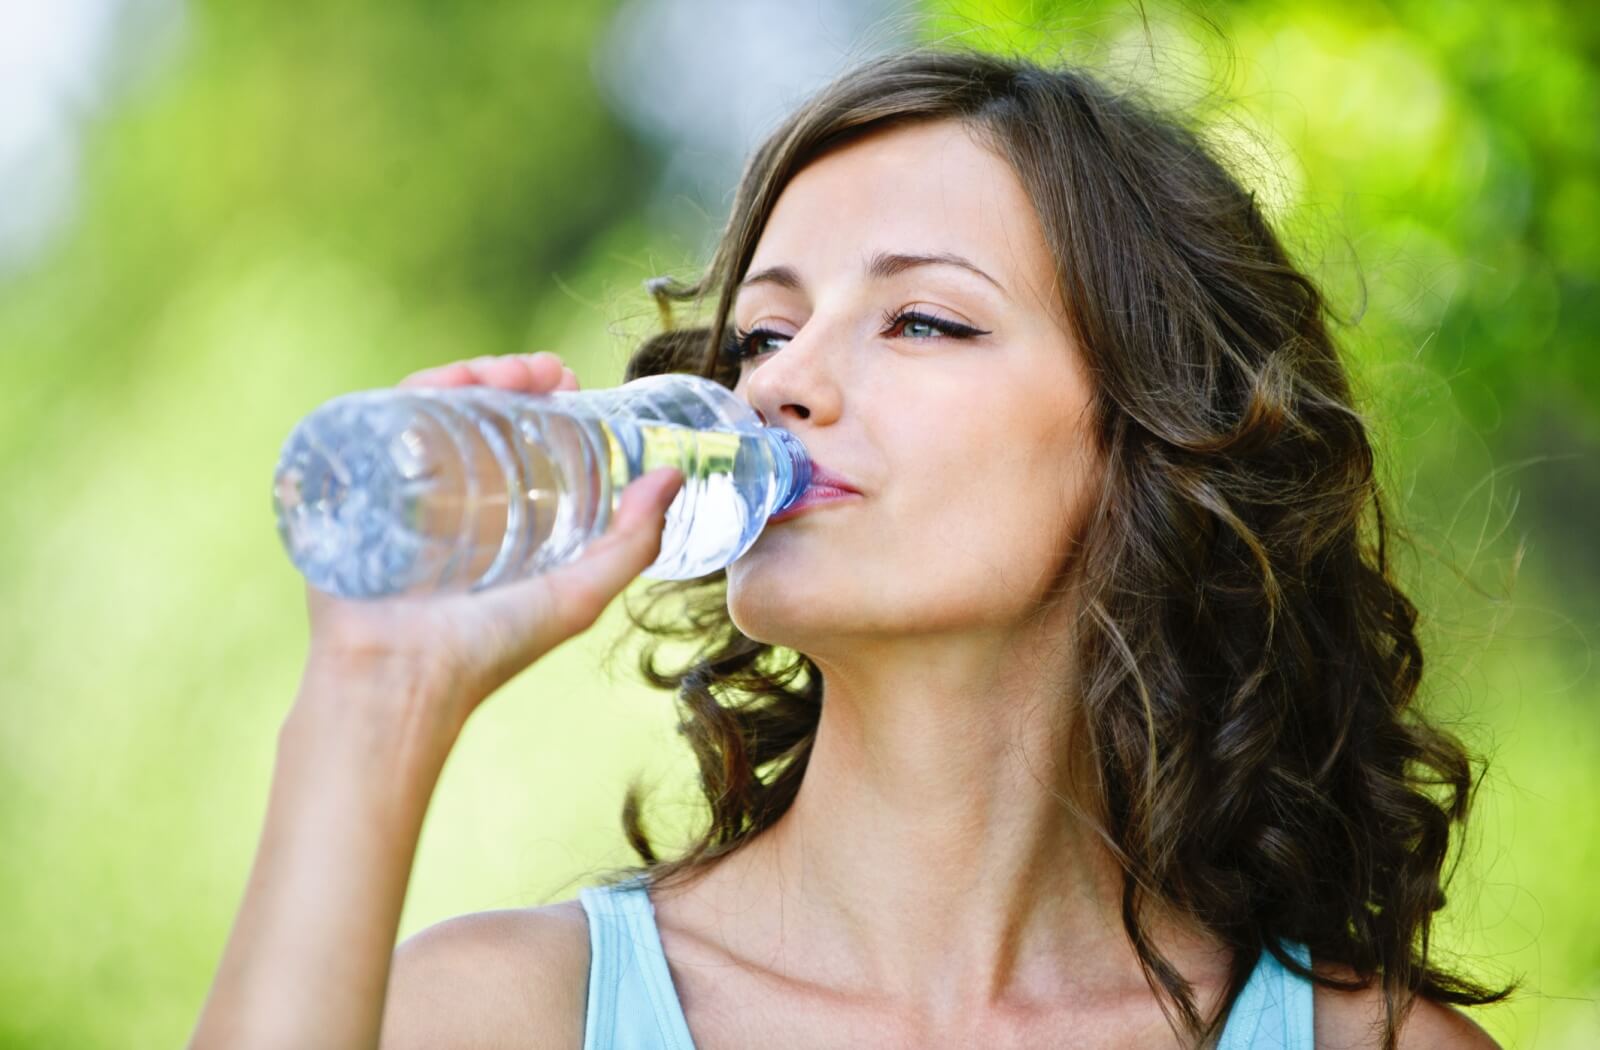 A woman drinking water from a plastic bottle.